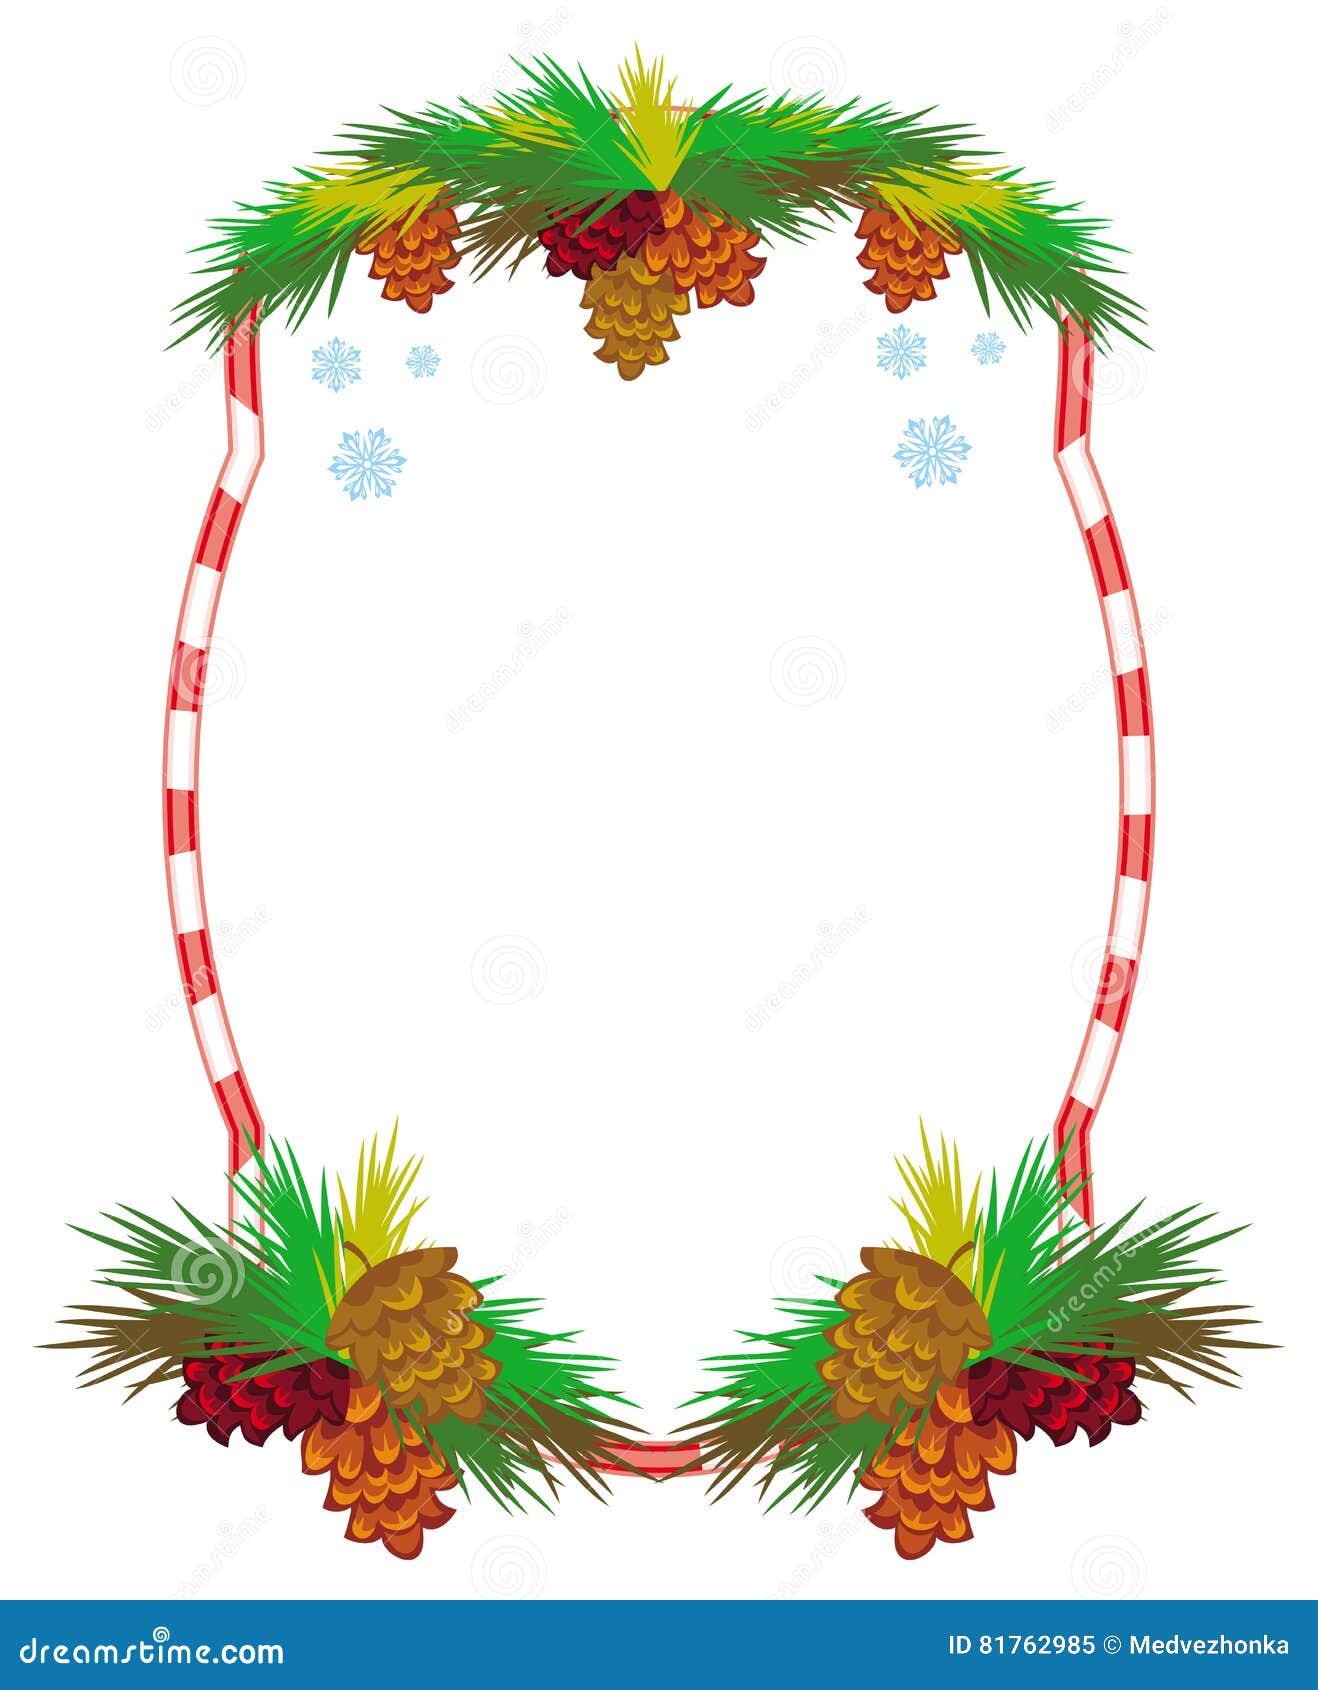 Holiday Frame With Pine Branch, Snow-flakes And Cones. Stock